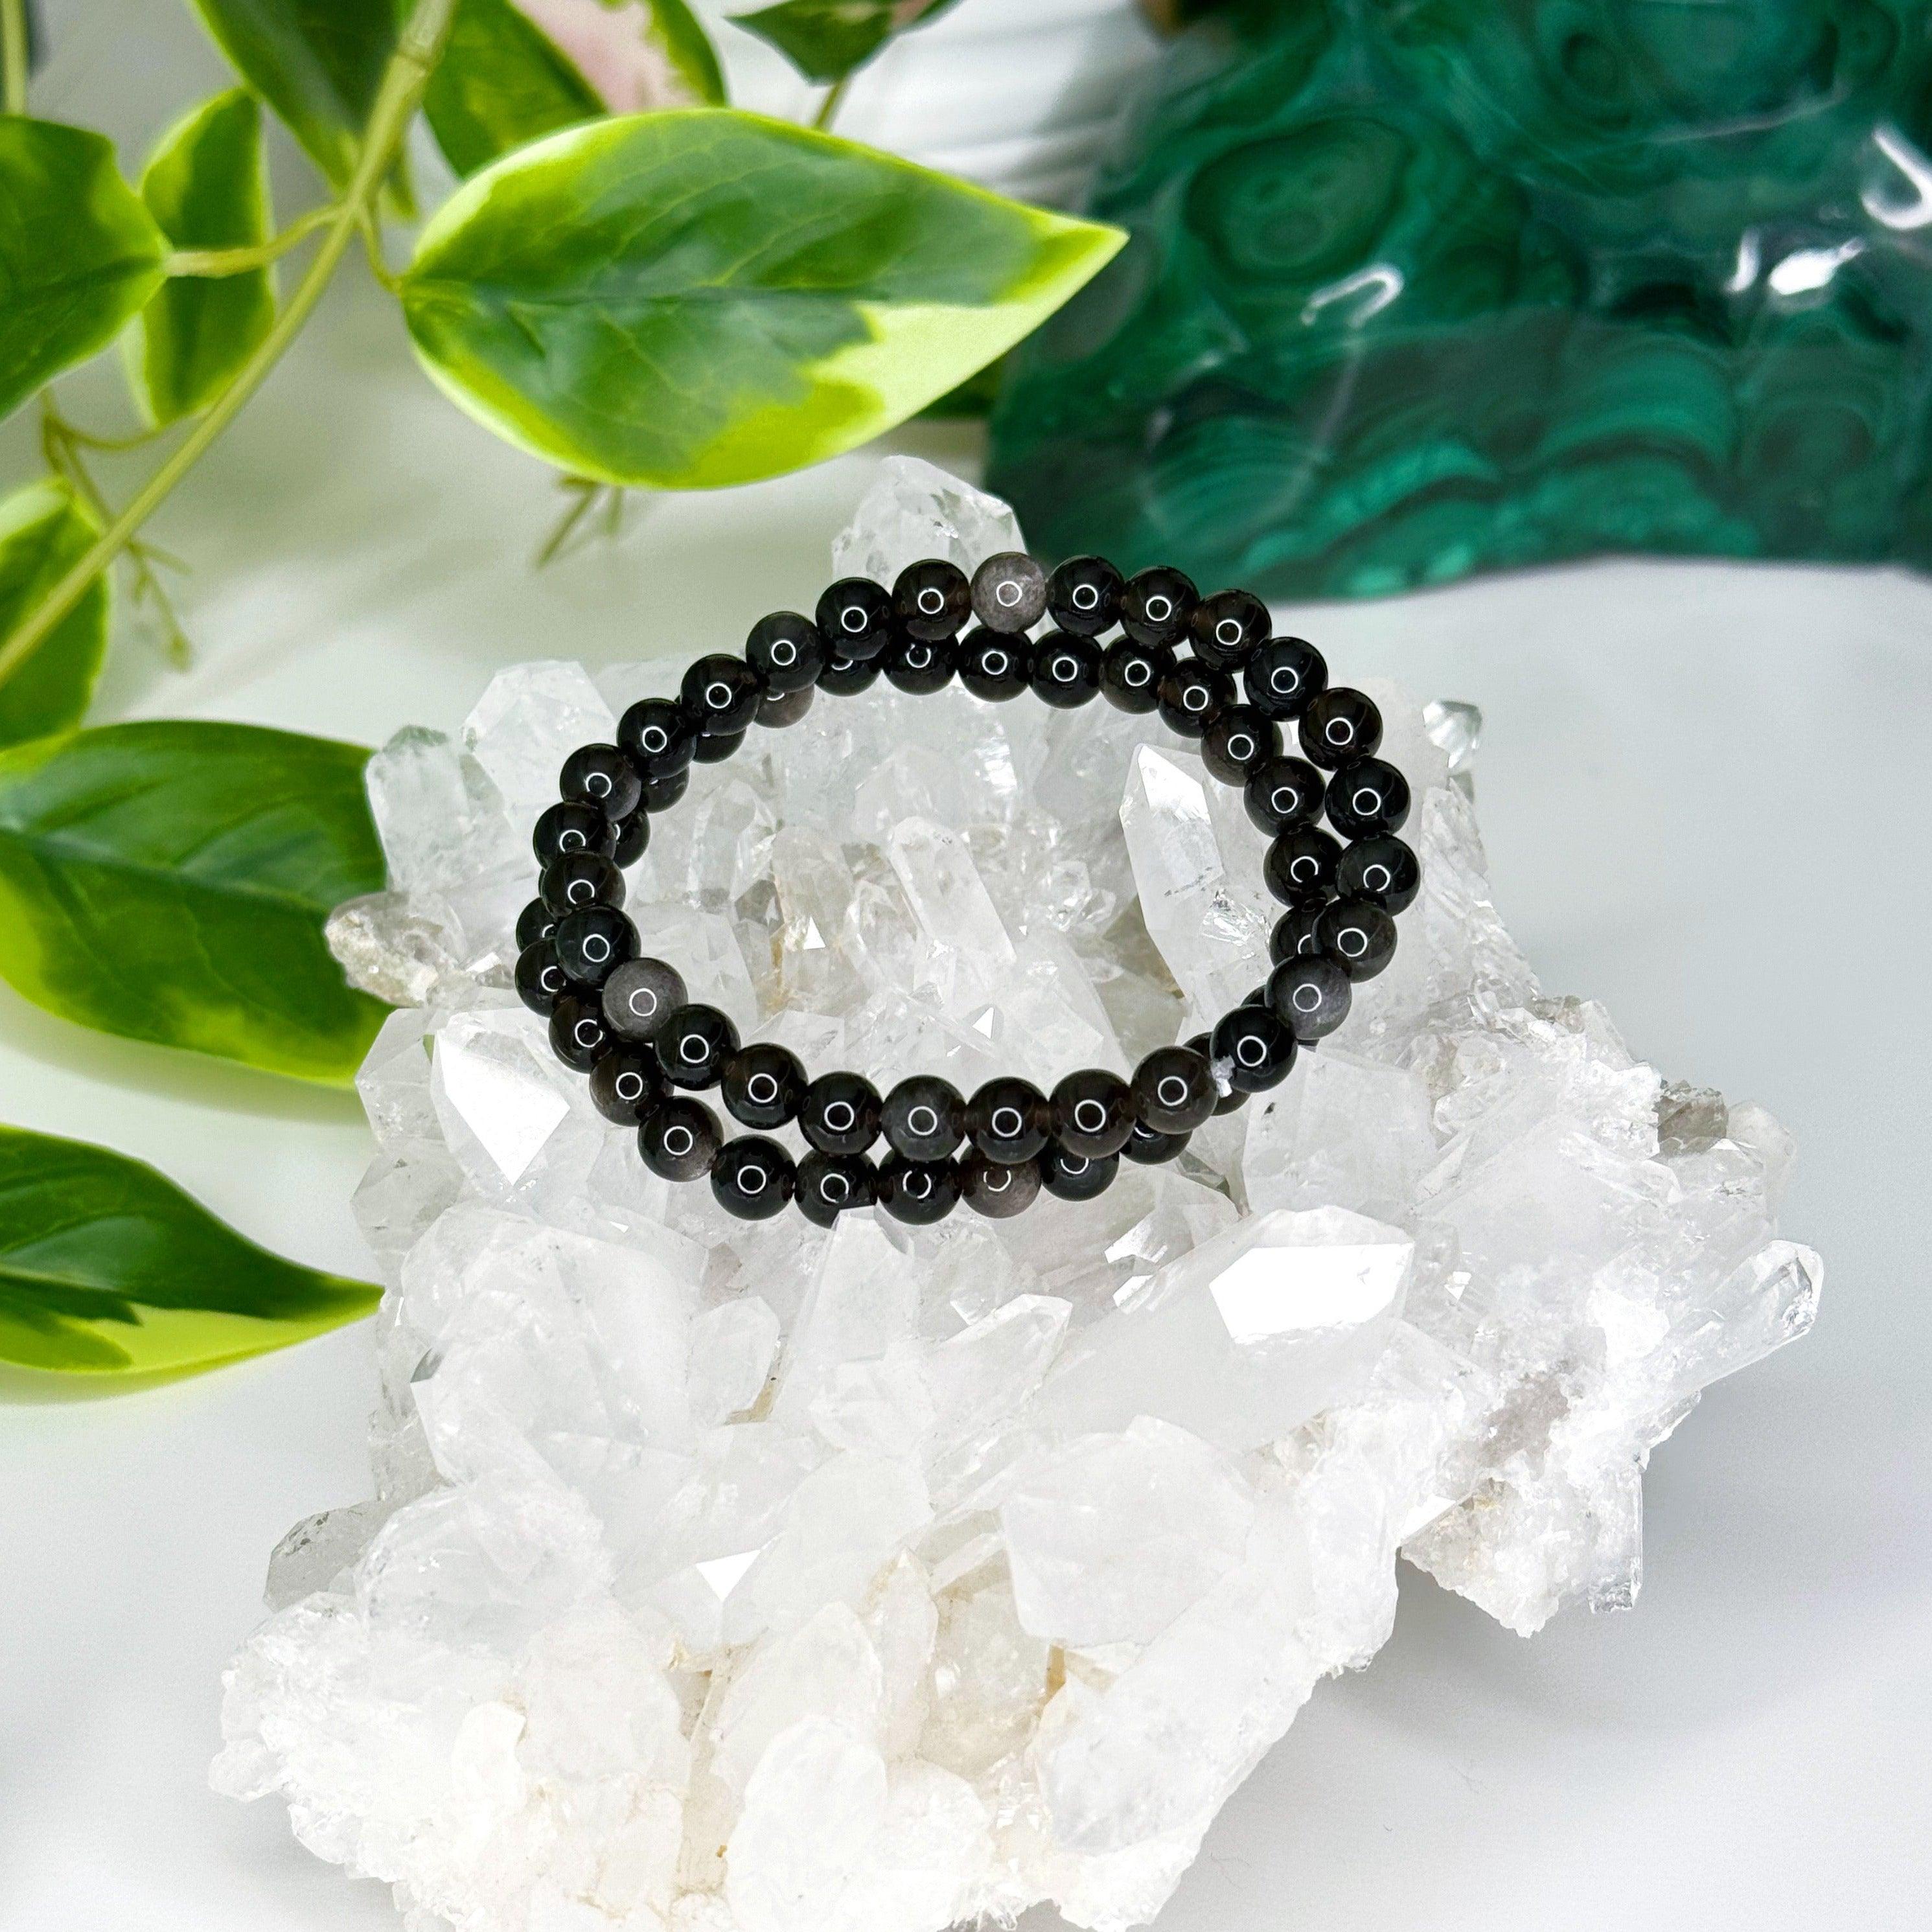 SILVER SHEEN OBSIDIAN 6mm - HANDMADE CRYSTAL BRACELET - 6mm, black, bracelet, crystal bracelet, Friday the 13th, handmade bracelet, jewelry, market bracelet, obsidian, protection gift bundle, recently added, silver sheen obsidian, Wearable - The Mineral Maven